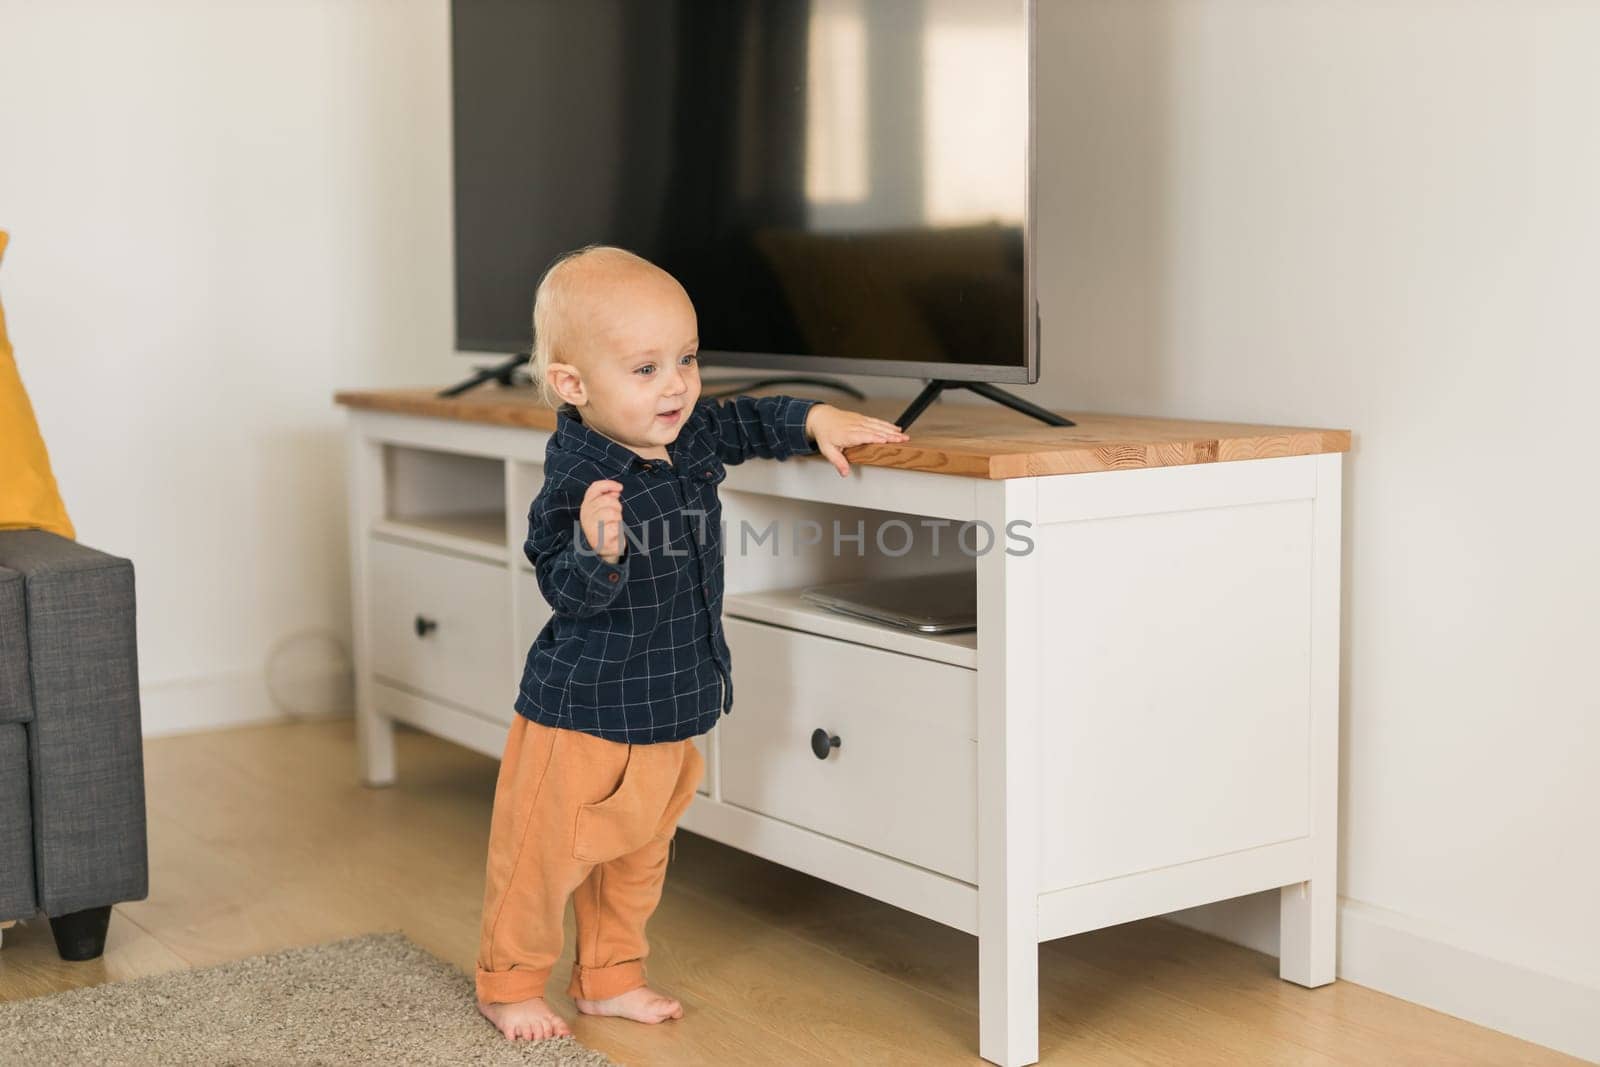 Toddler boy laughing having fun standing in living room at home copy space. Adorable baby making first steps alone. Happy childhood and child care concept by Satura86